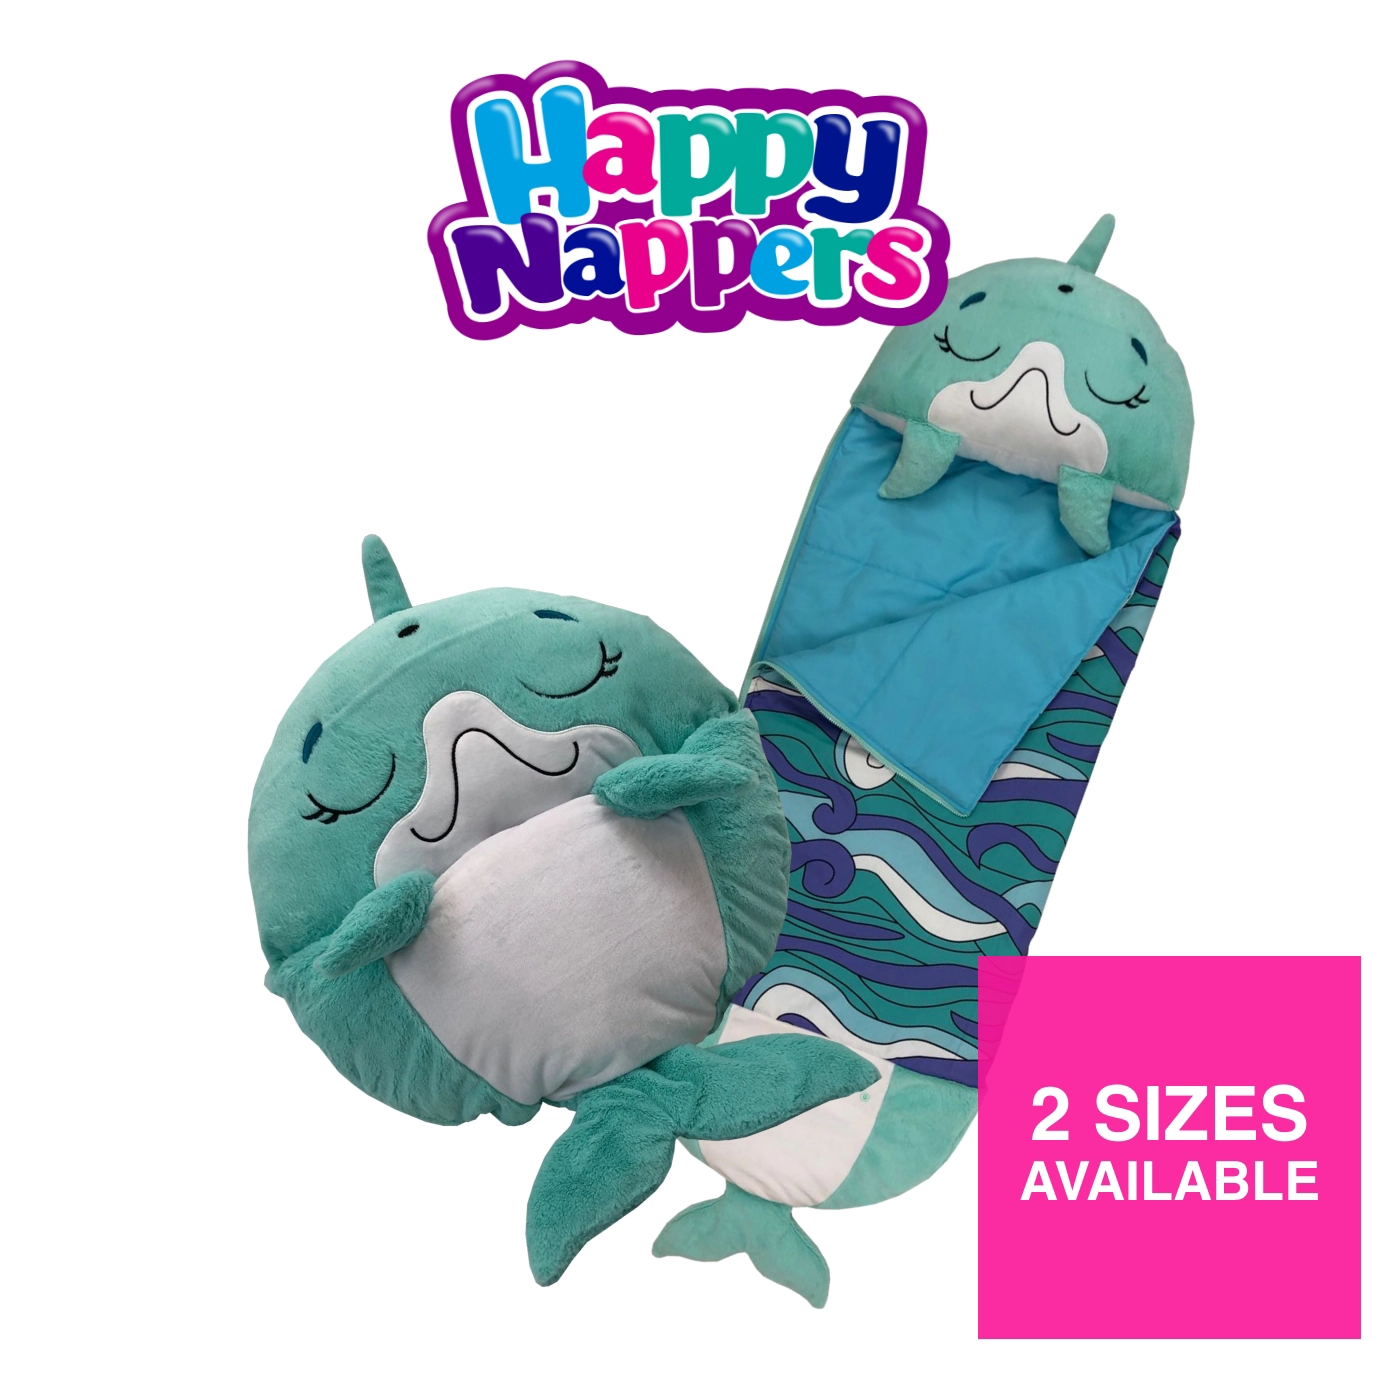 Happy nappers, Brand store